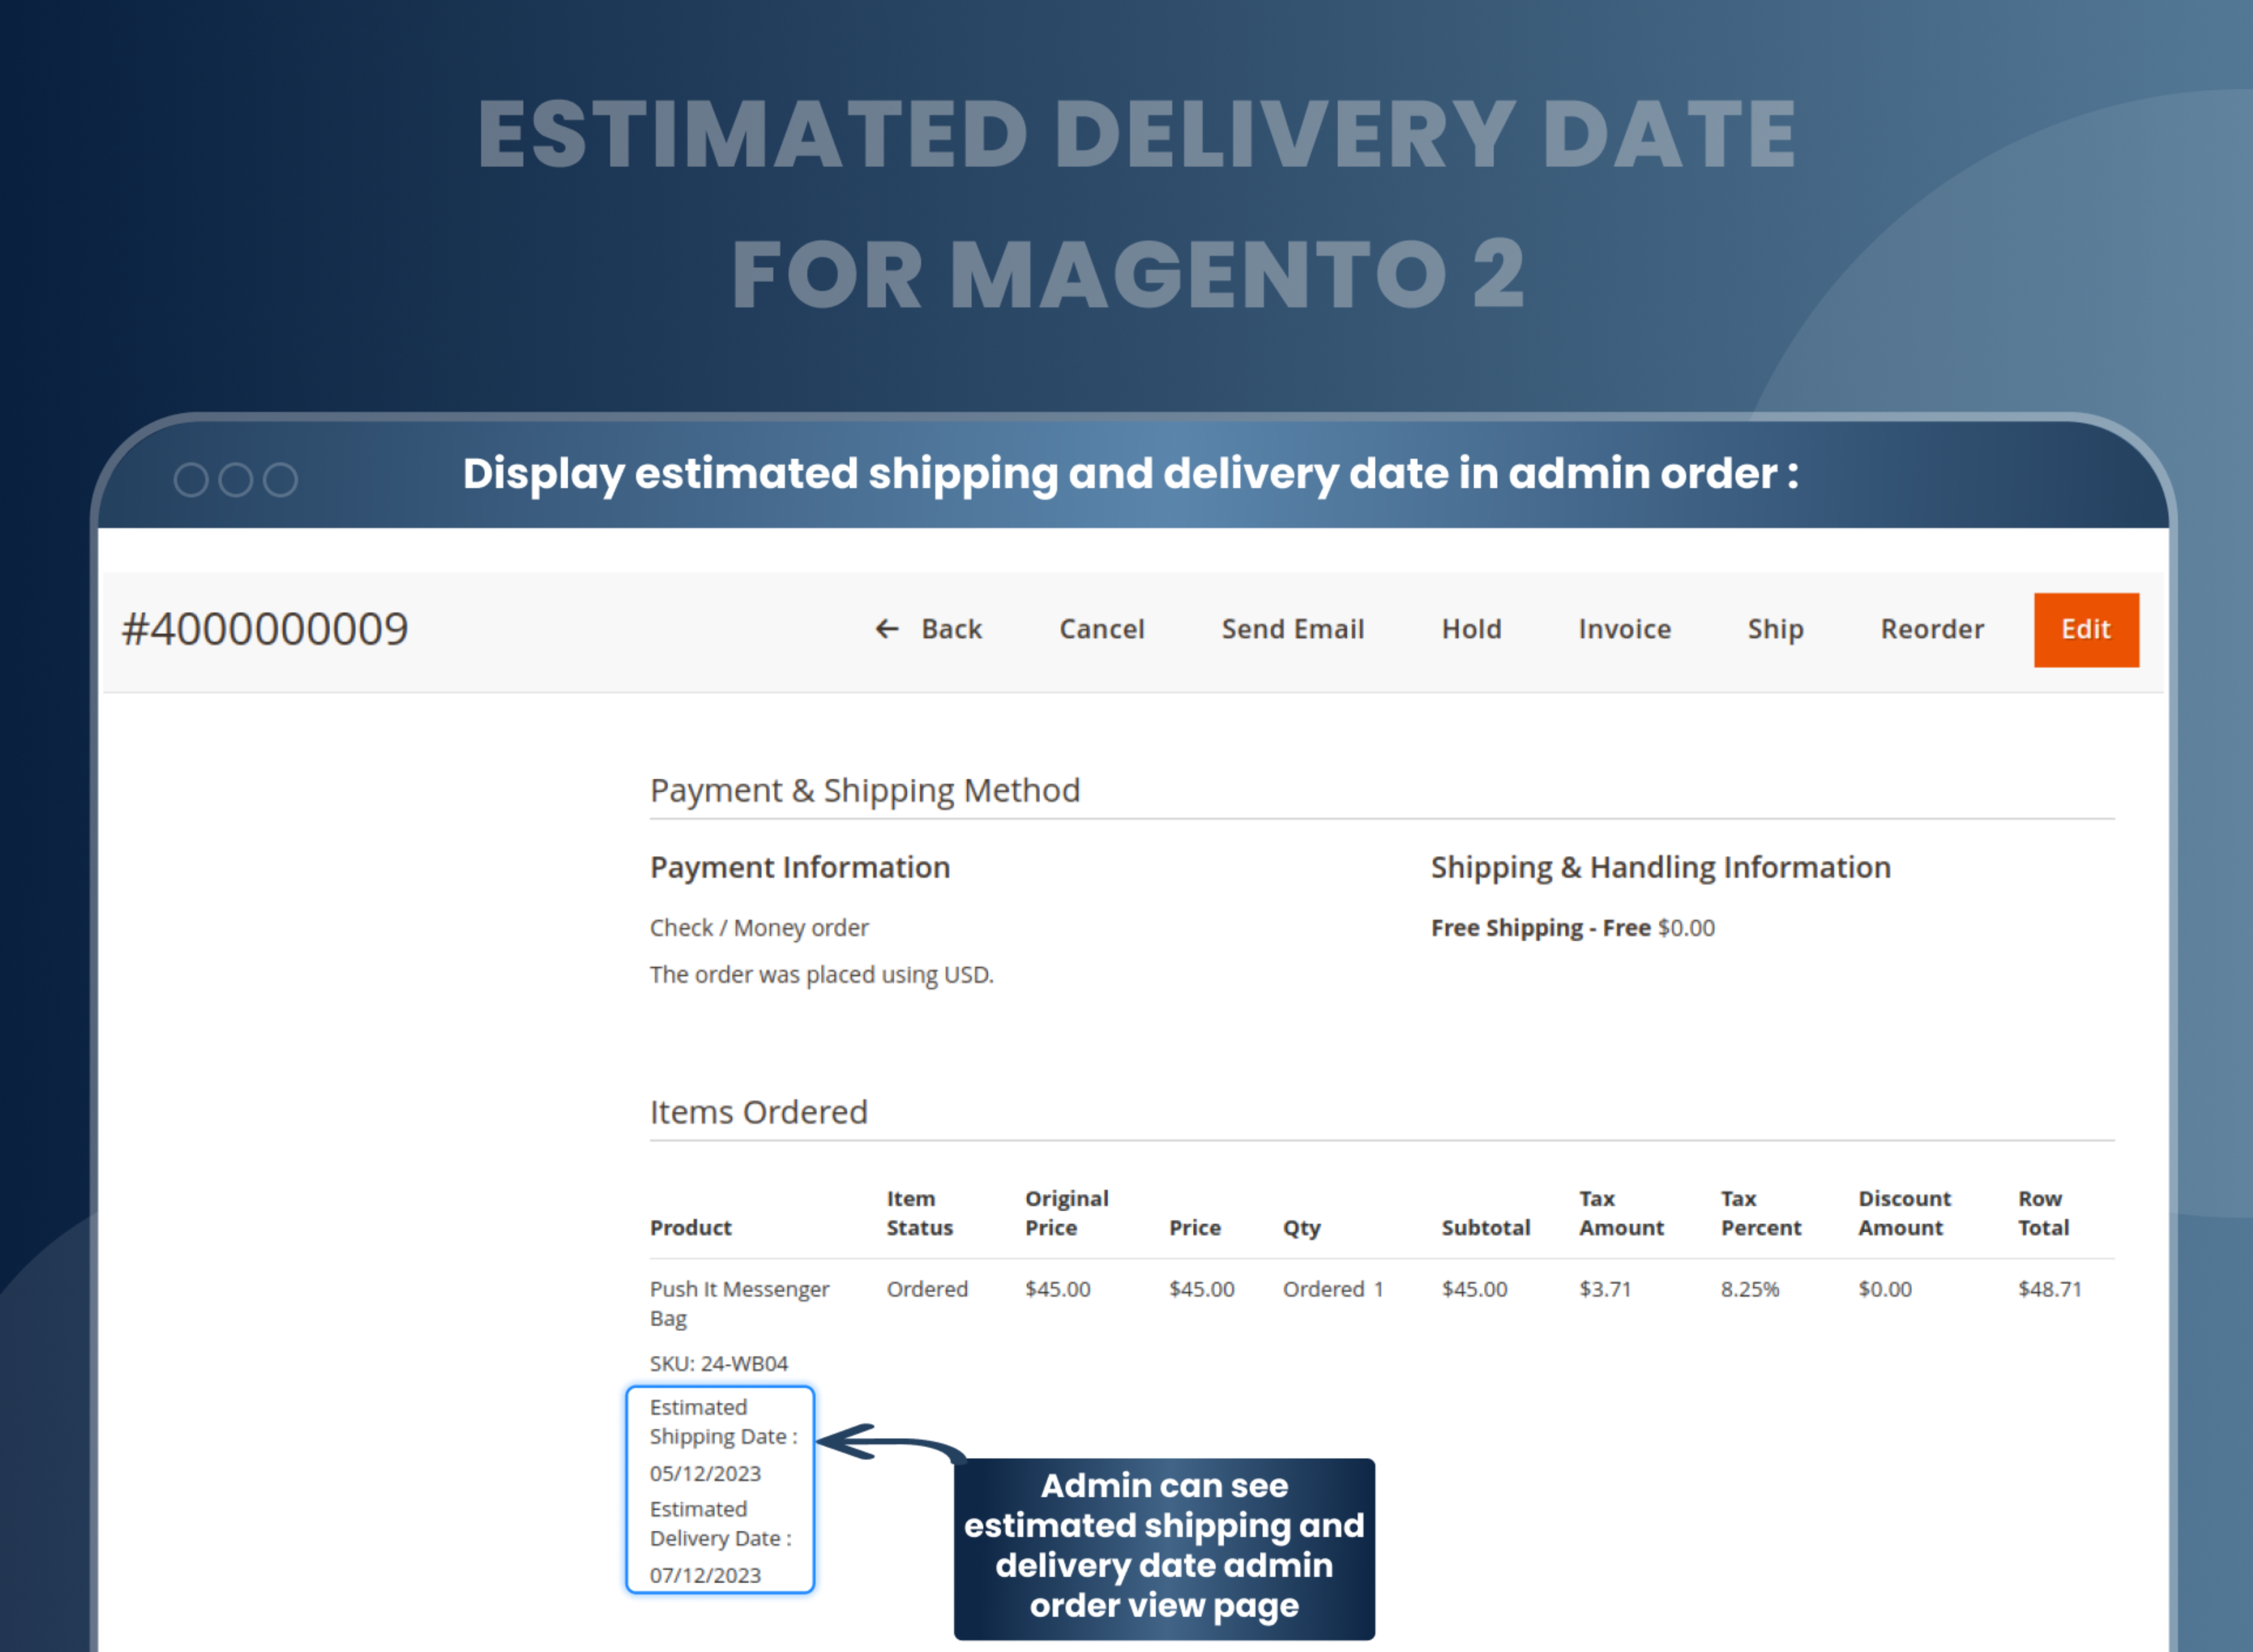 Display estimated shipping and delivery date in admin order